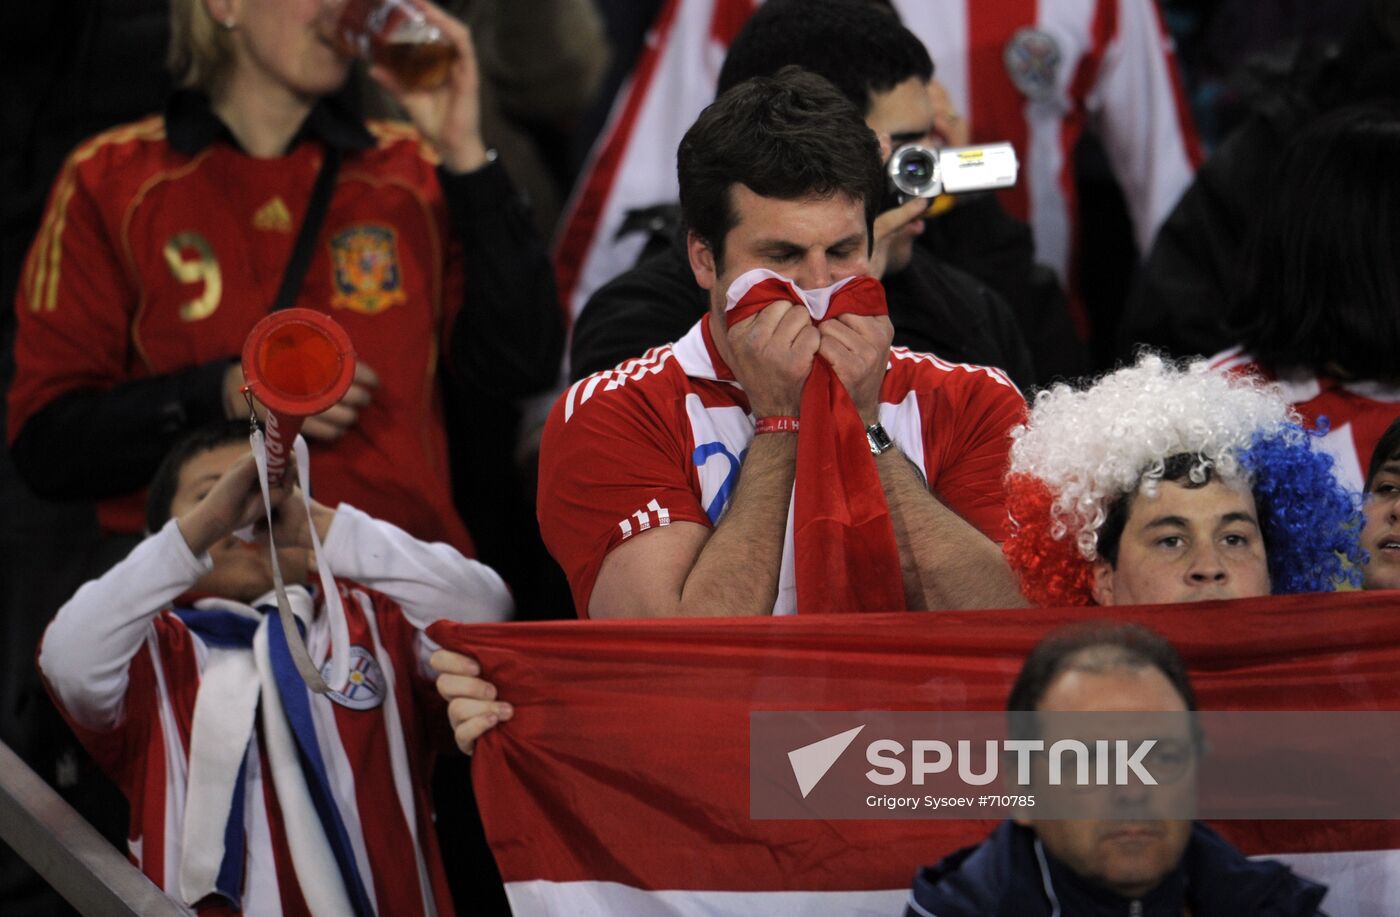 FIFA World Cup 2010. Paraguay vs. Spain